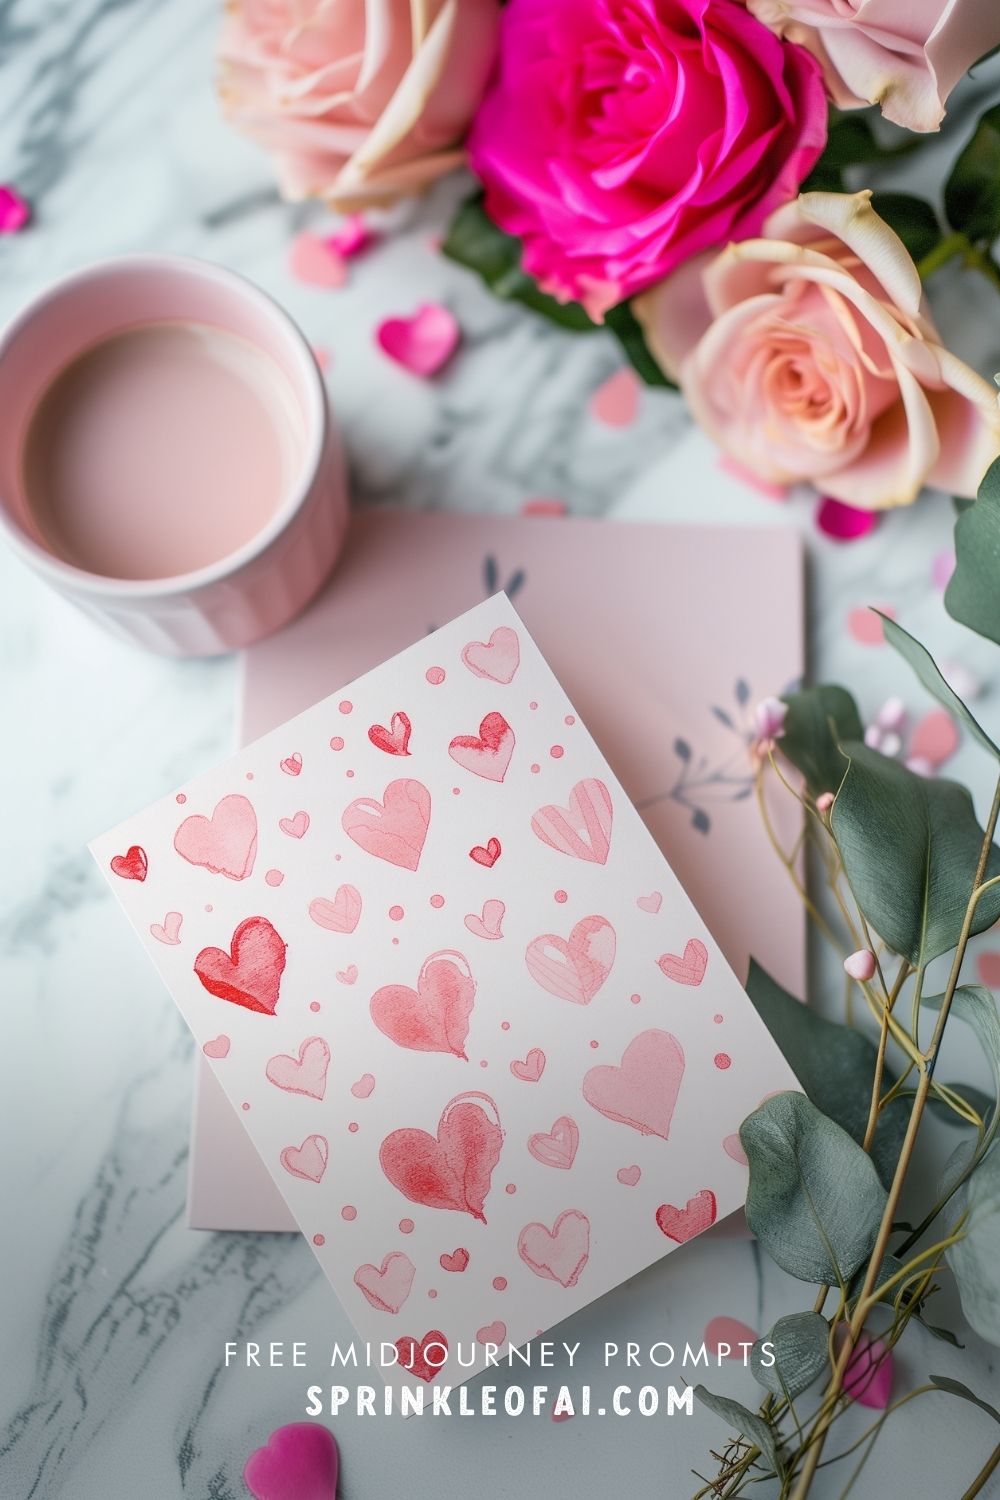 Best Midjourney Valentine's Day Prompts for Romantic Stock Photography - Sprinkle of AI - Free Midjourney Prompts for Valentine